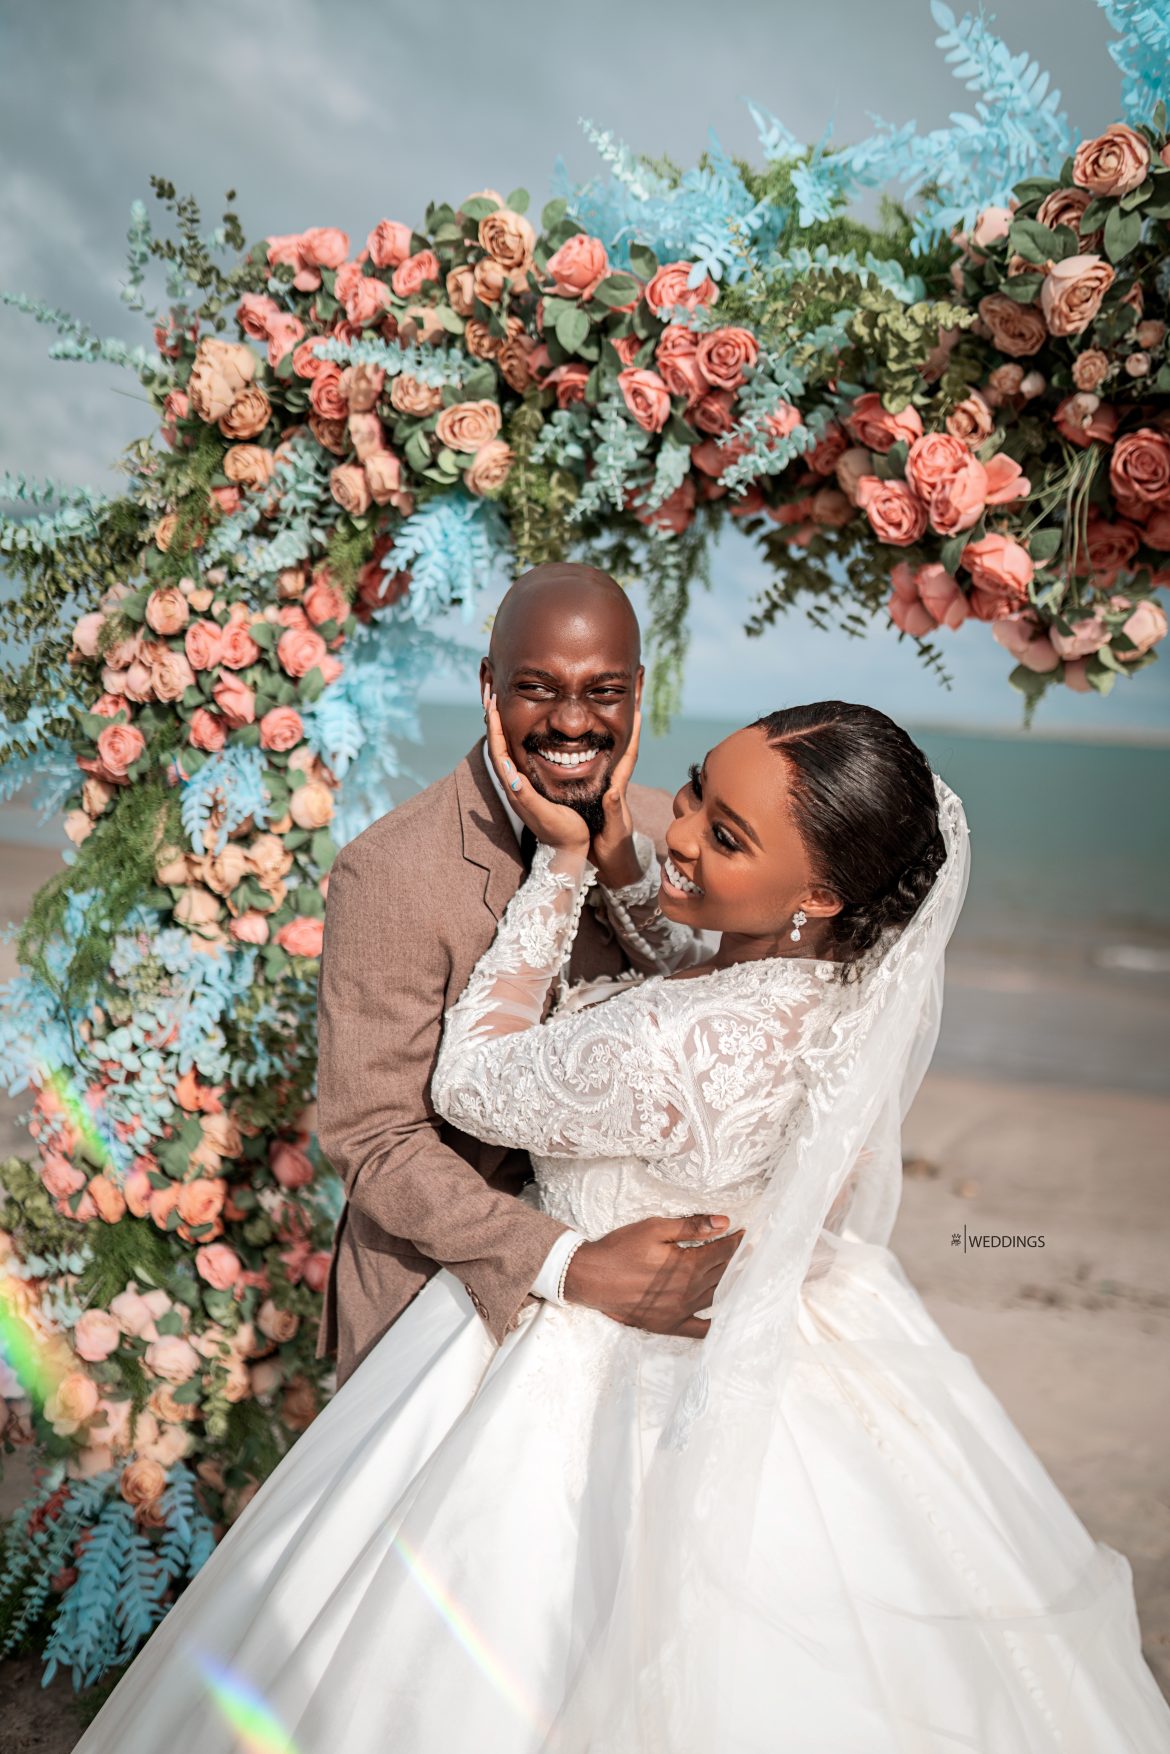 Blend Love & Nature on Your Big Day with This Beach Styled Shoot!